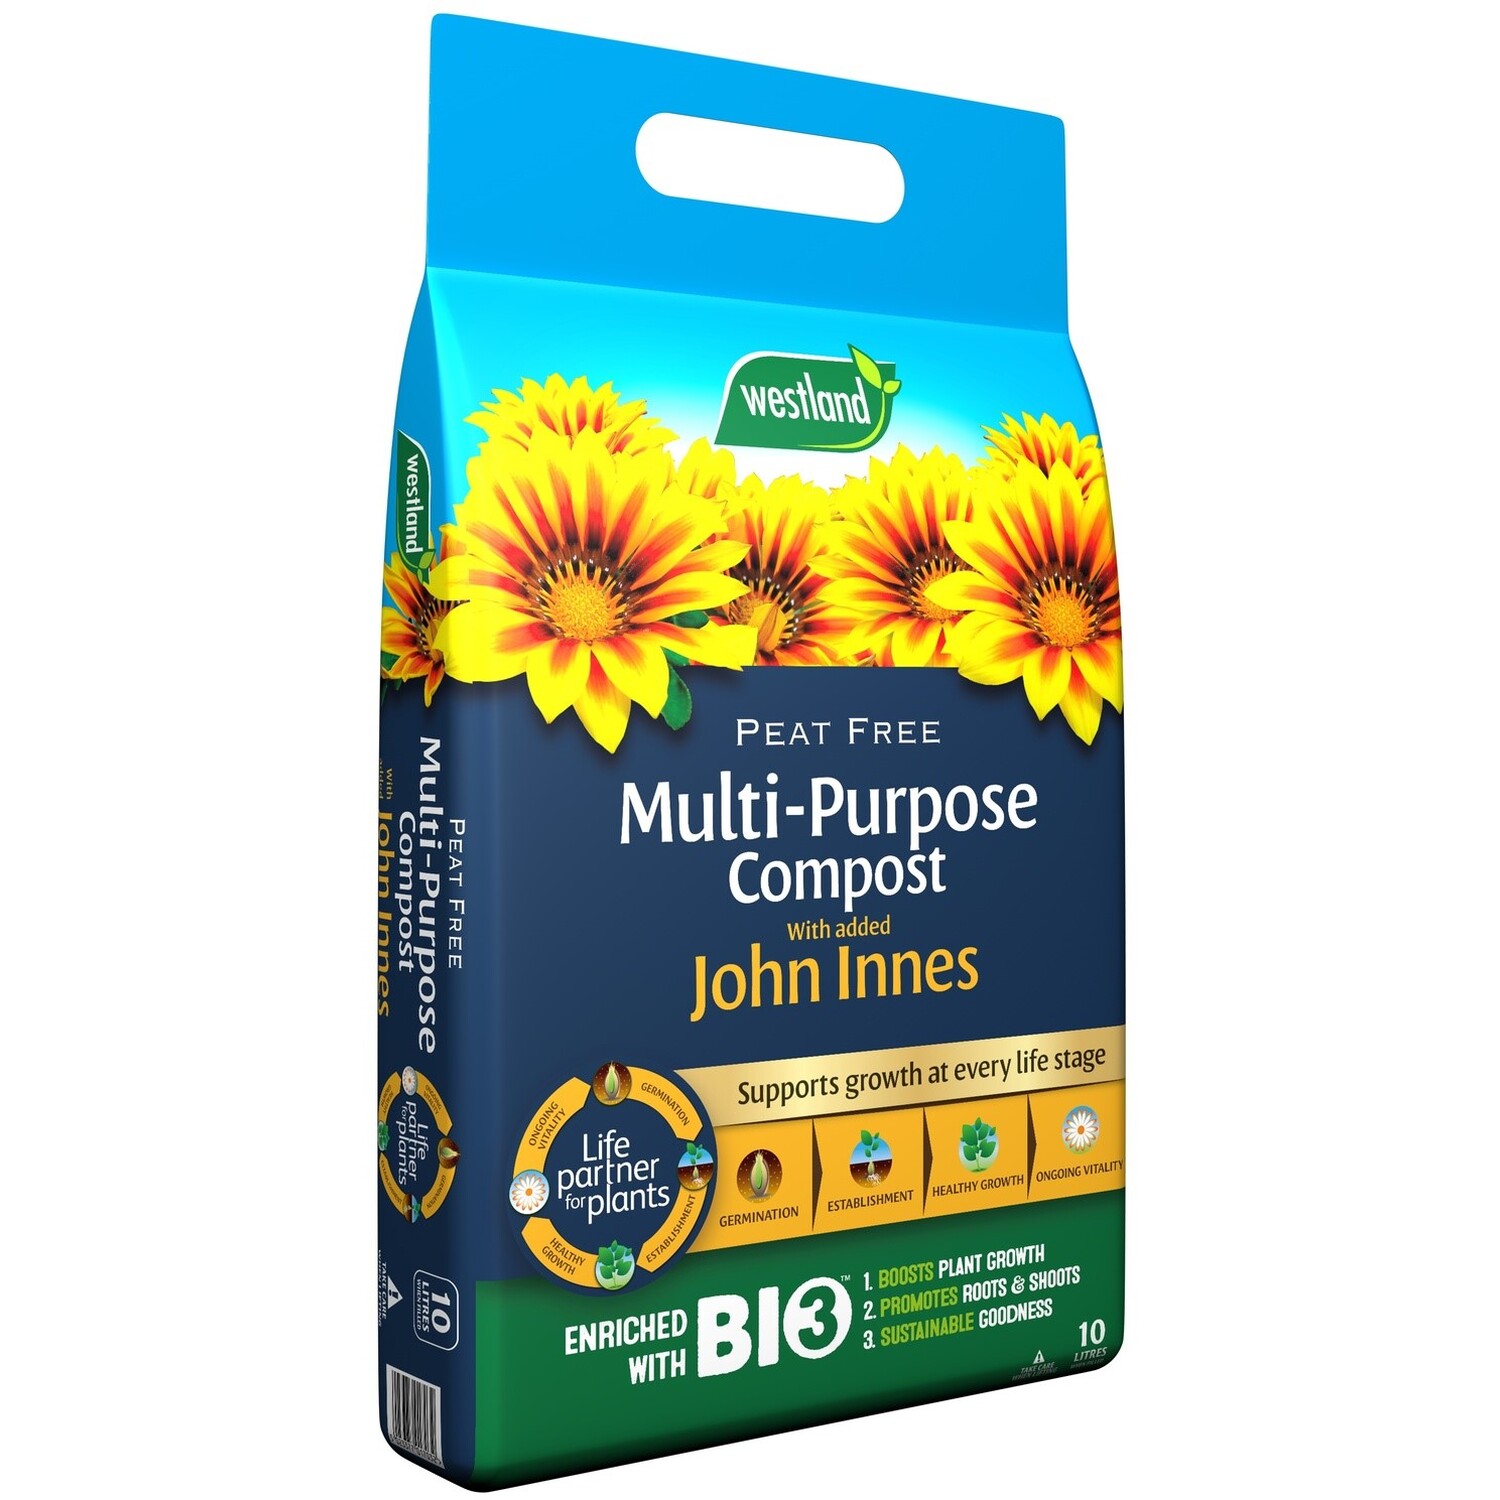 Peat Free Compost with John Innes Image